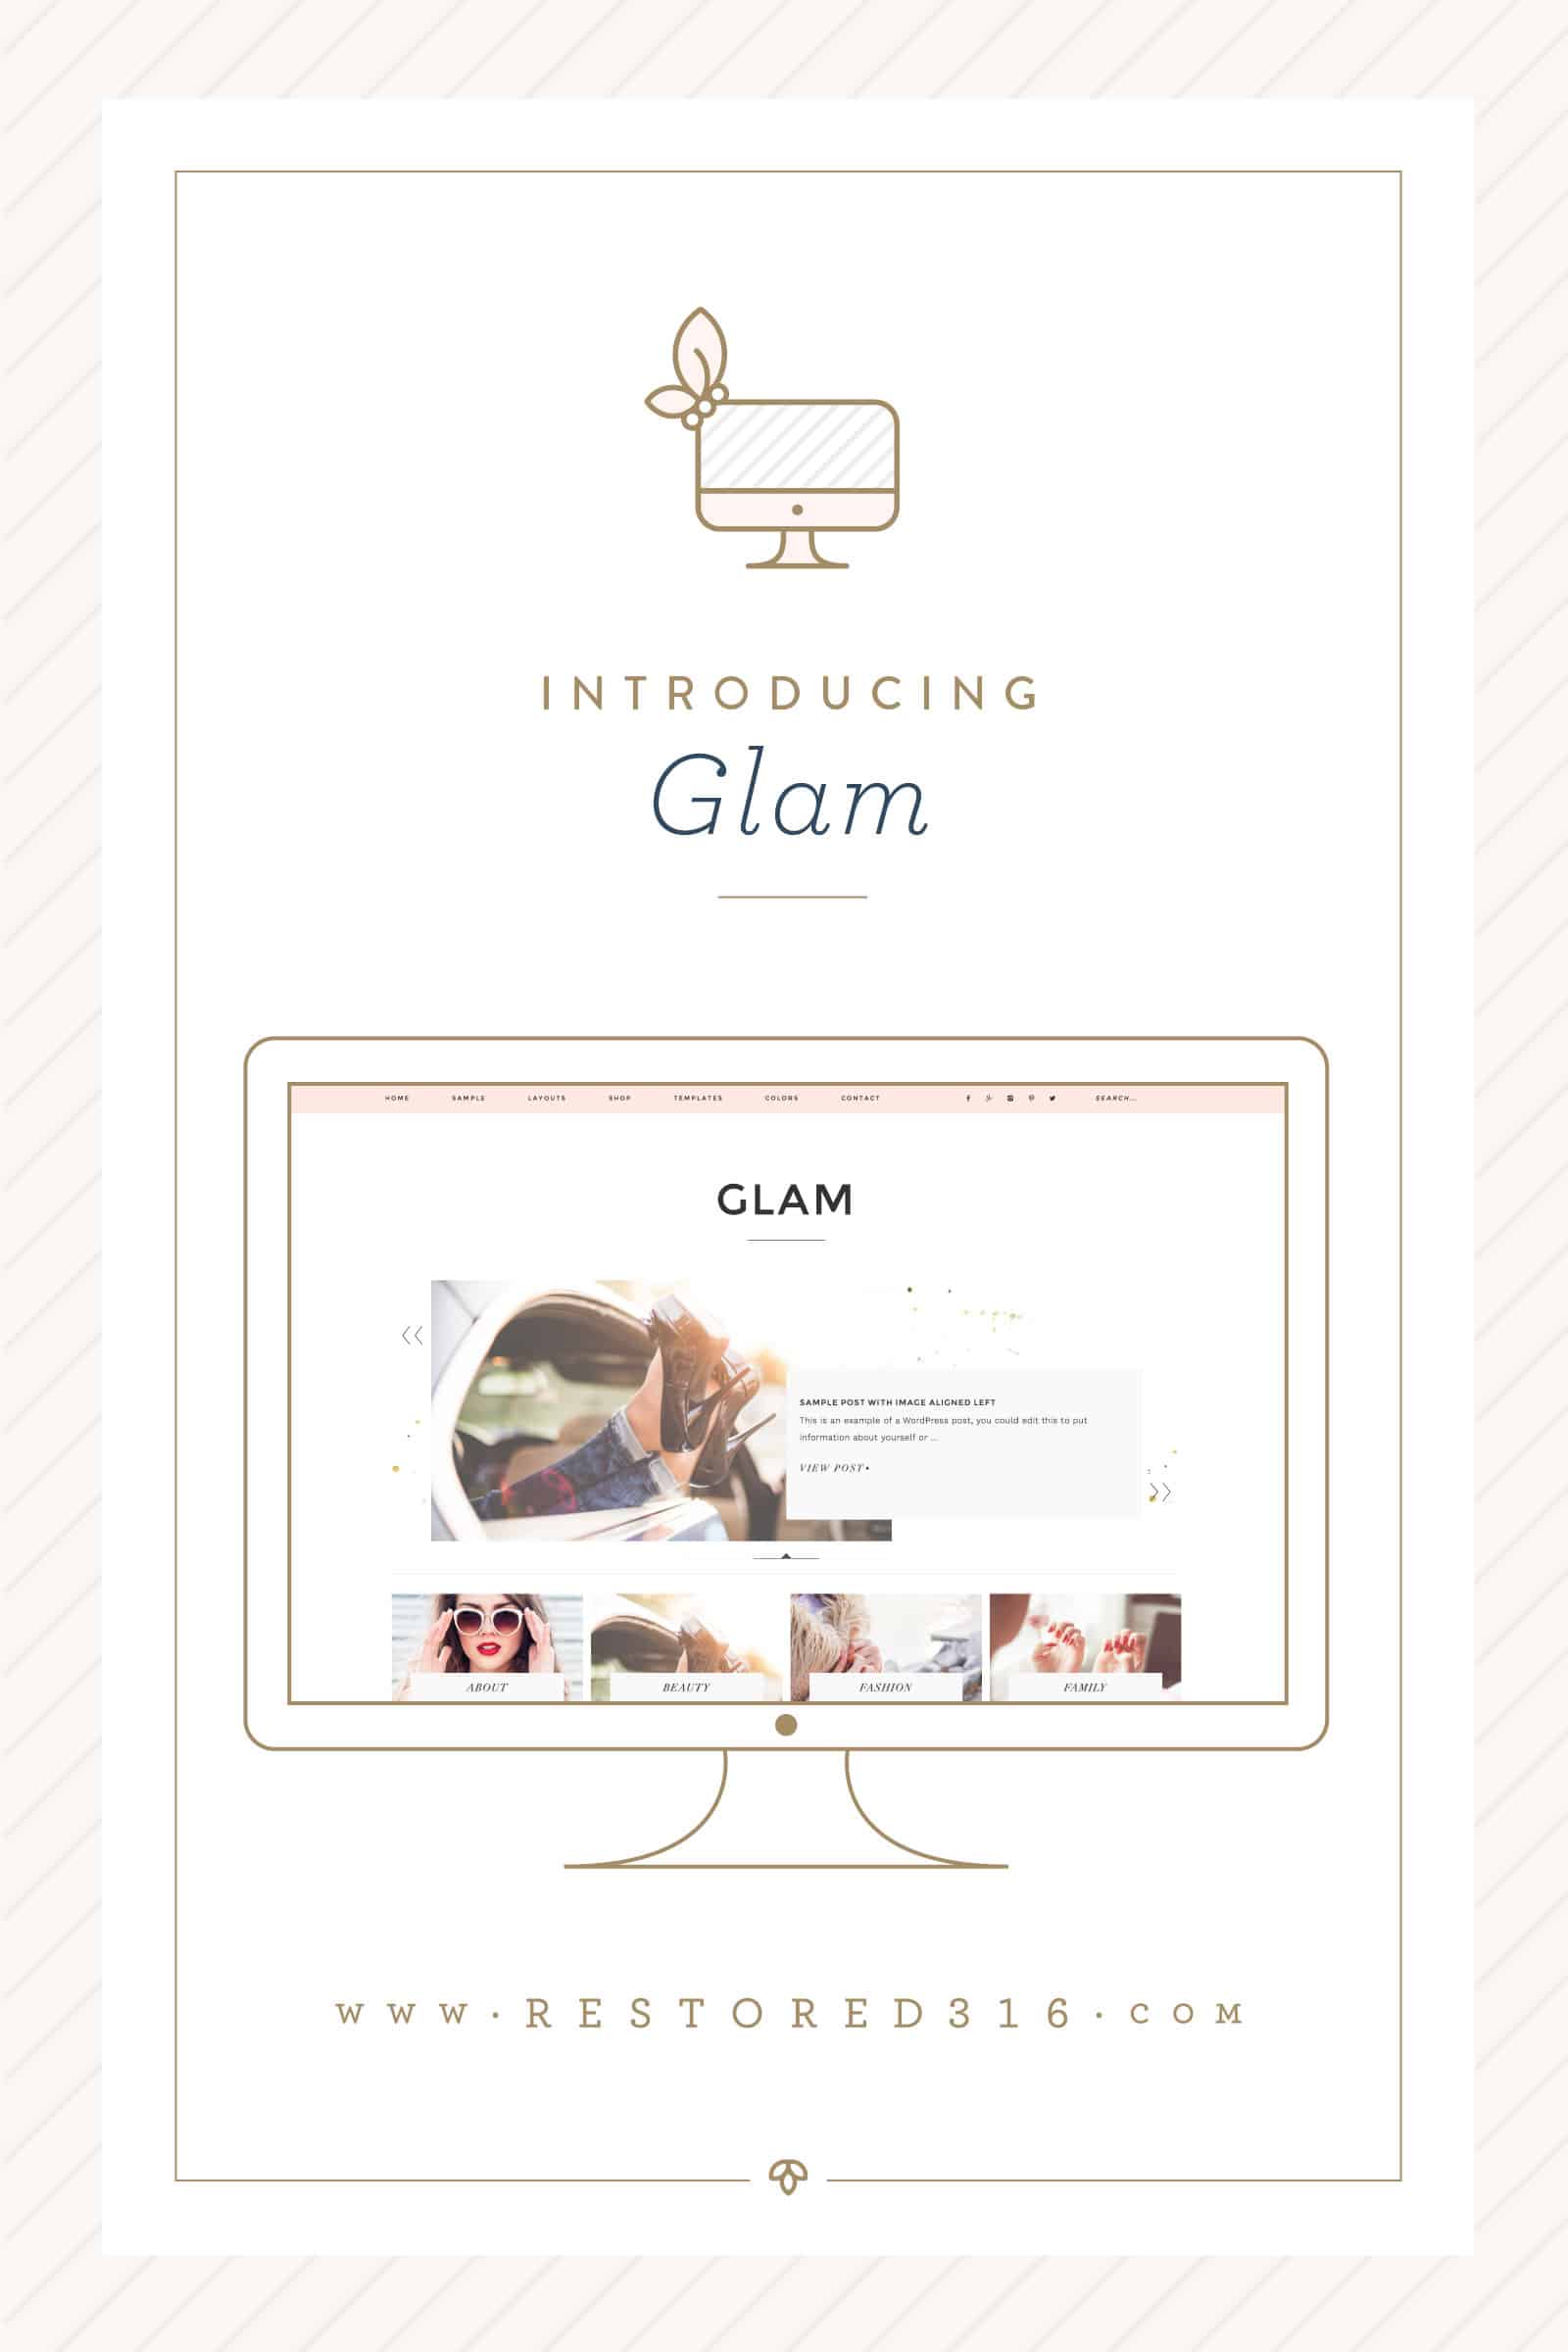 Introducing Glam: A Lifestyle Genesis Theme